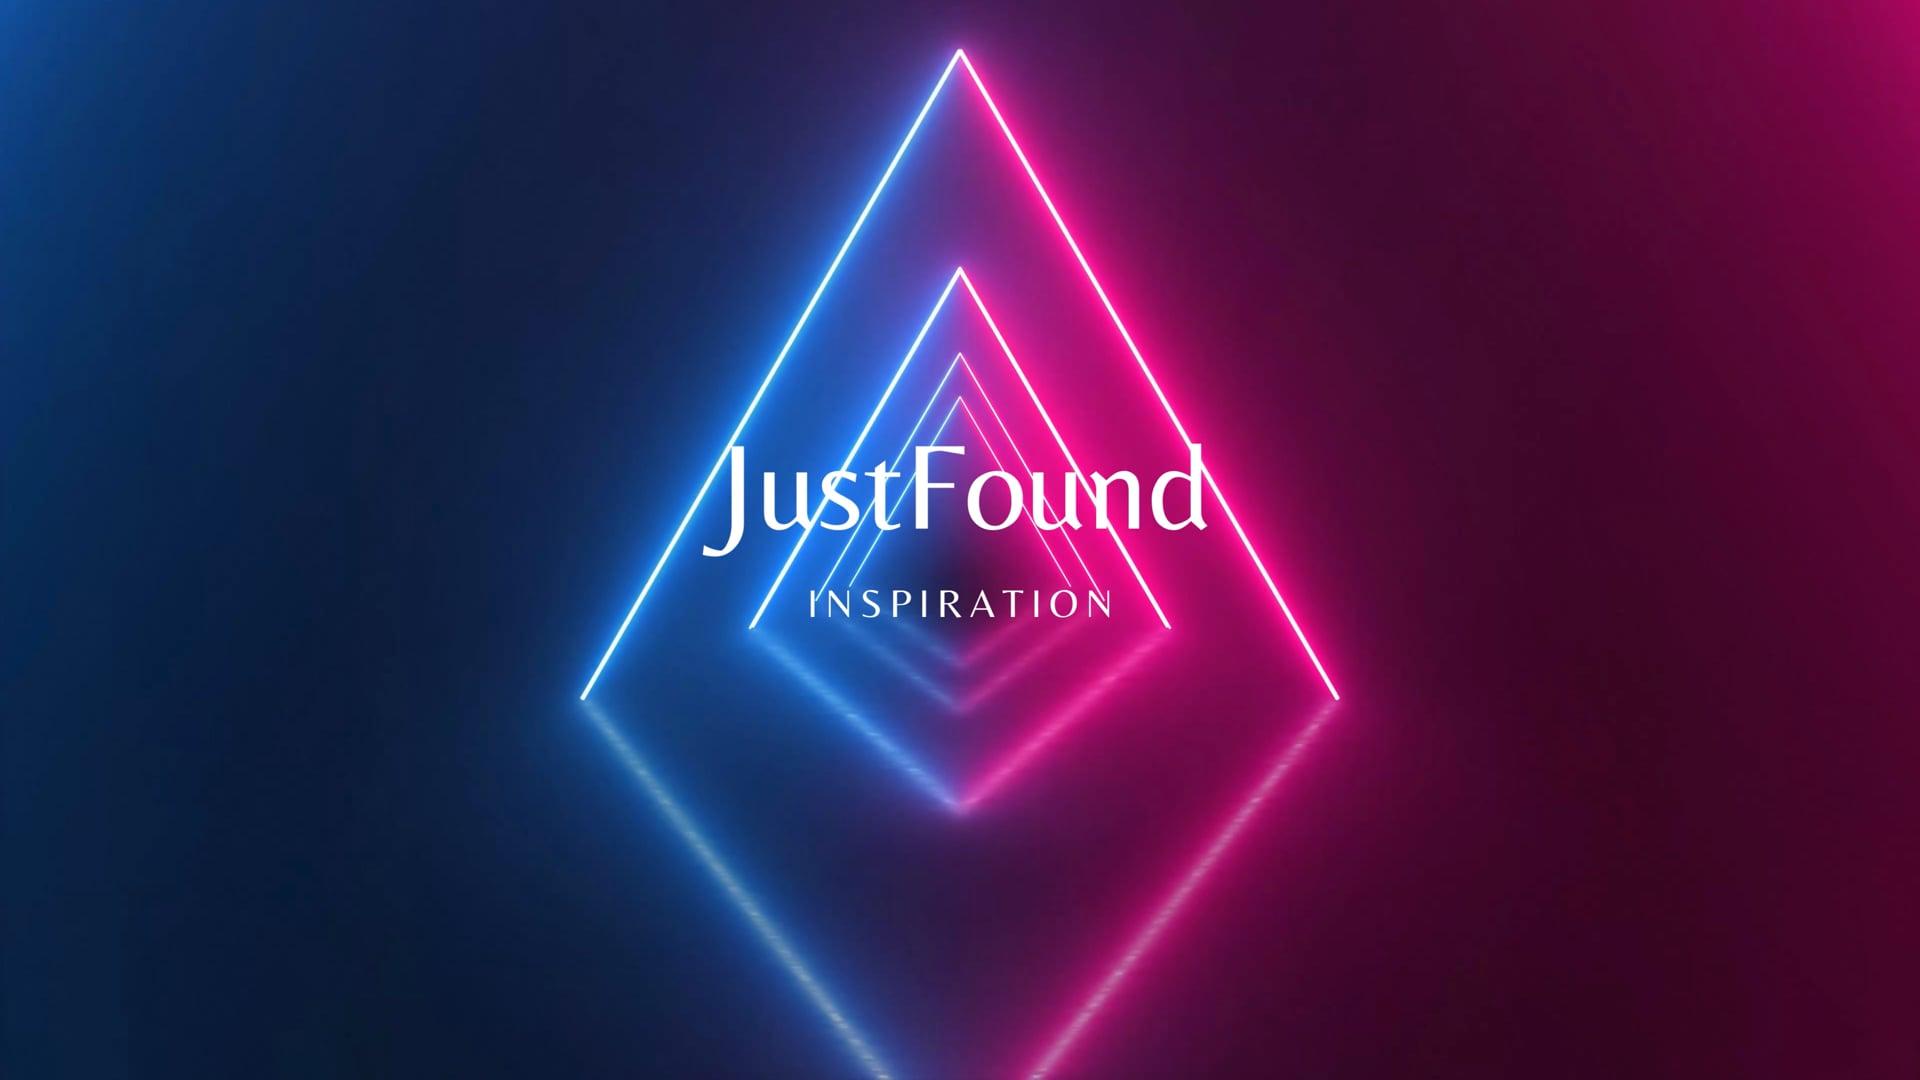 Product Justfound - Our Services, Digital Branding Agency, Web and Mobile Design and Creation, Corporate Digital Branding image